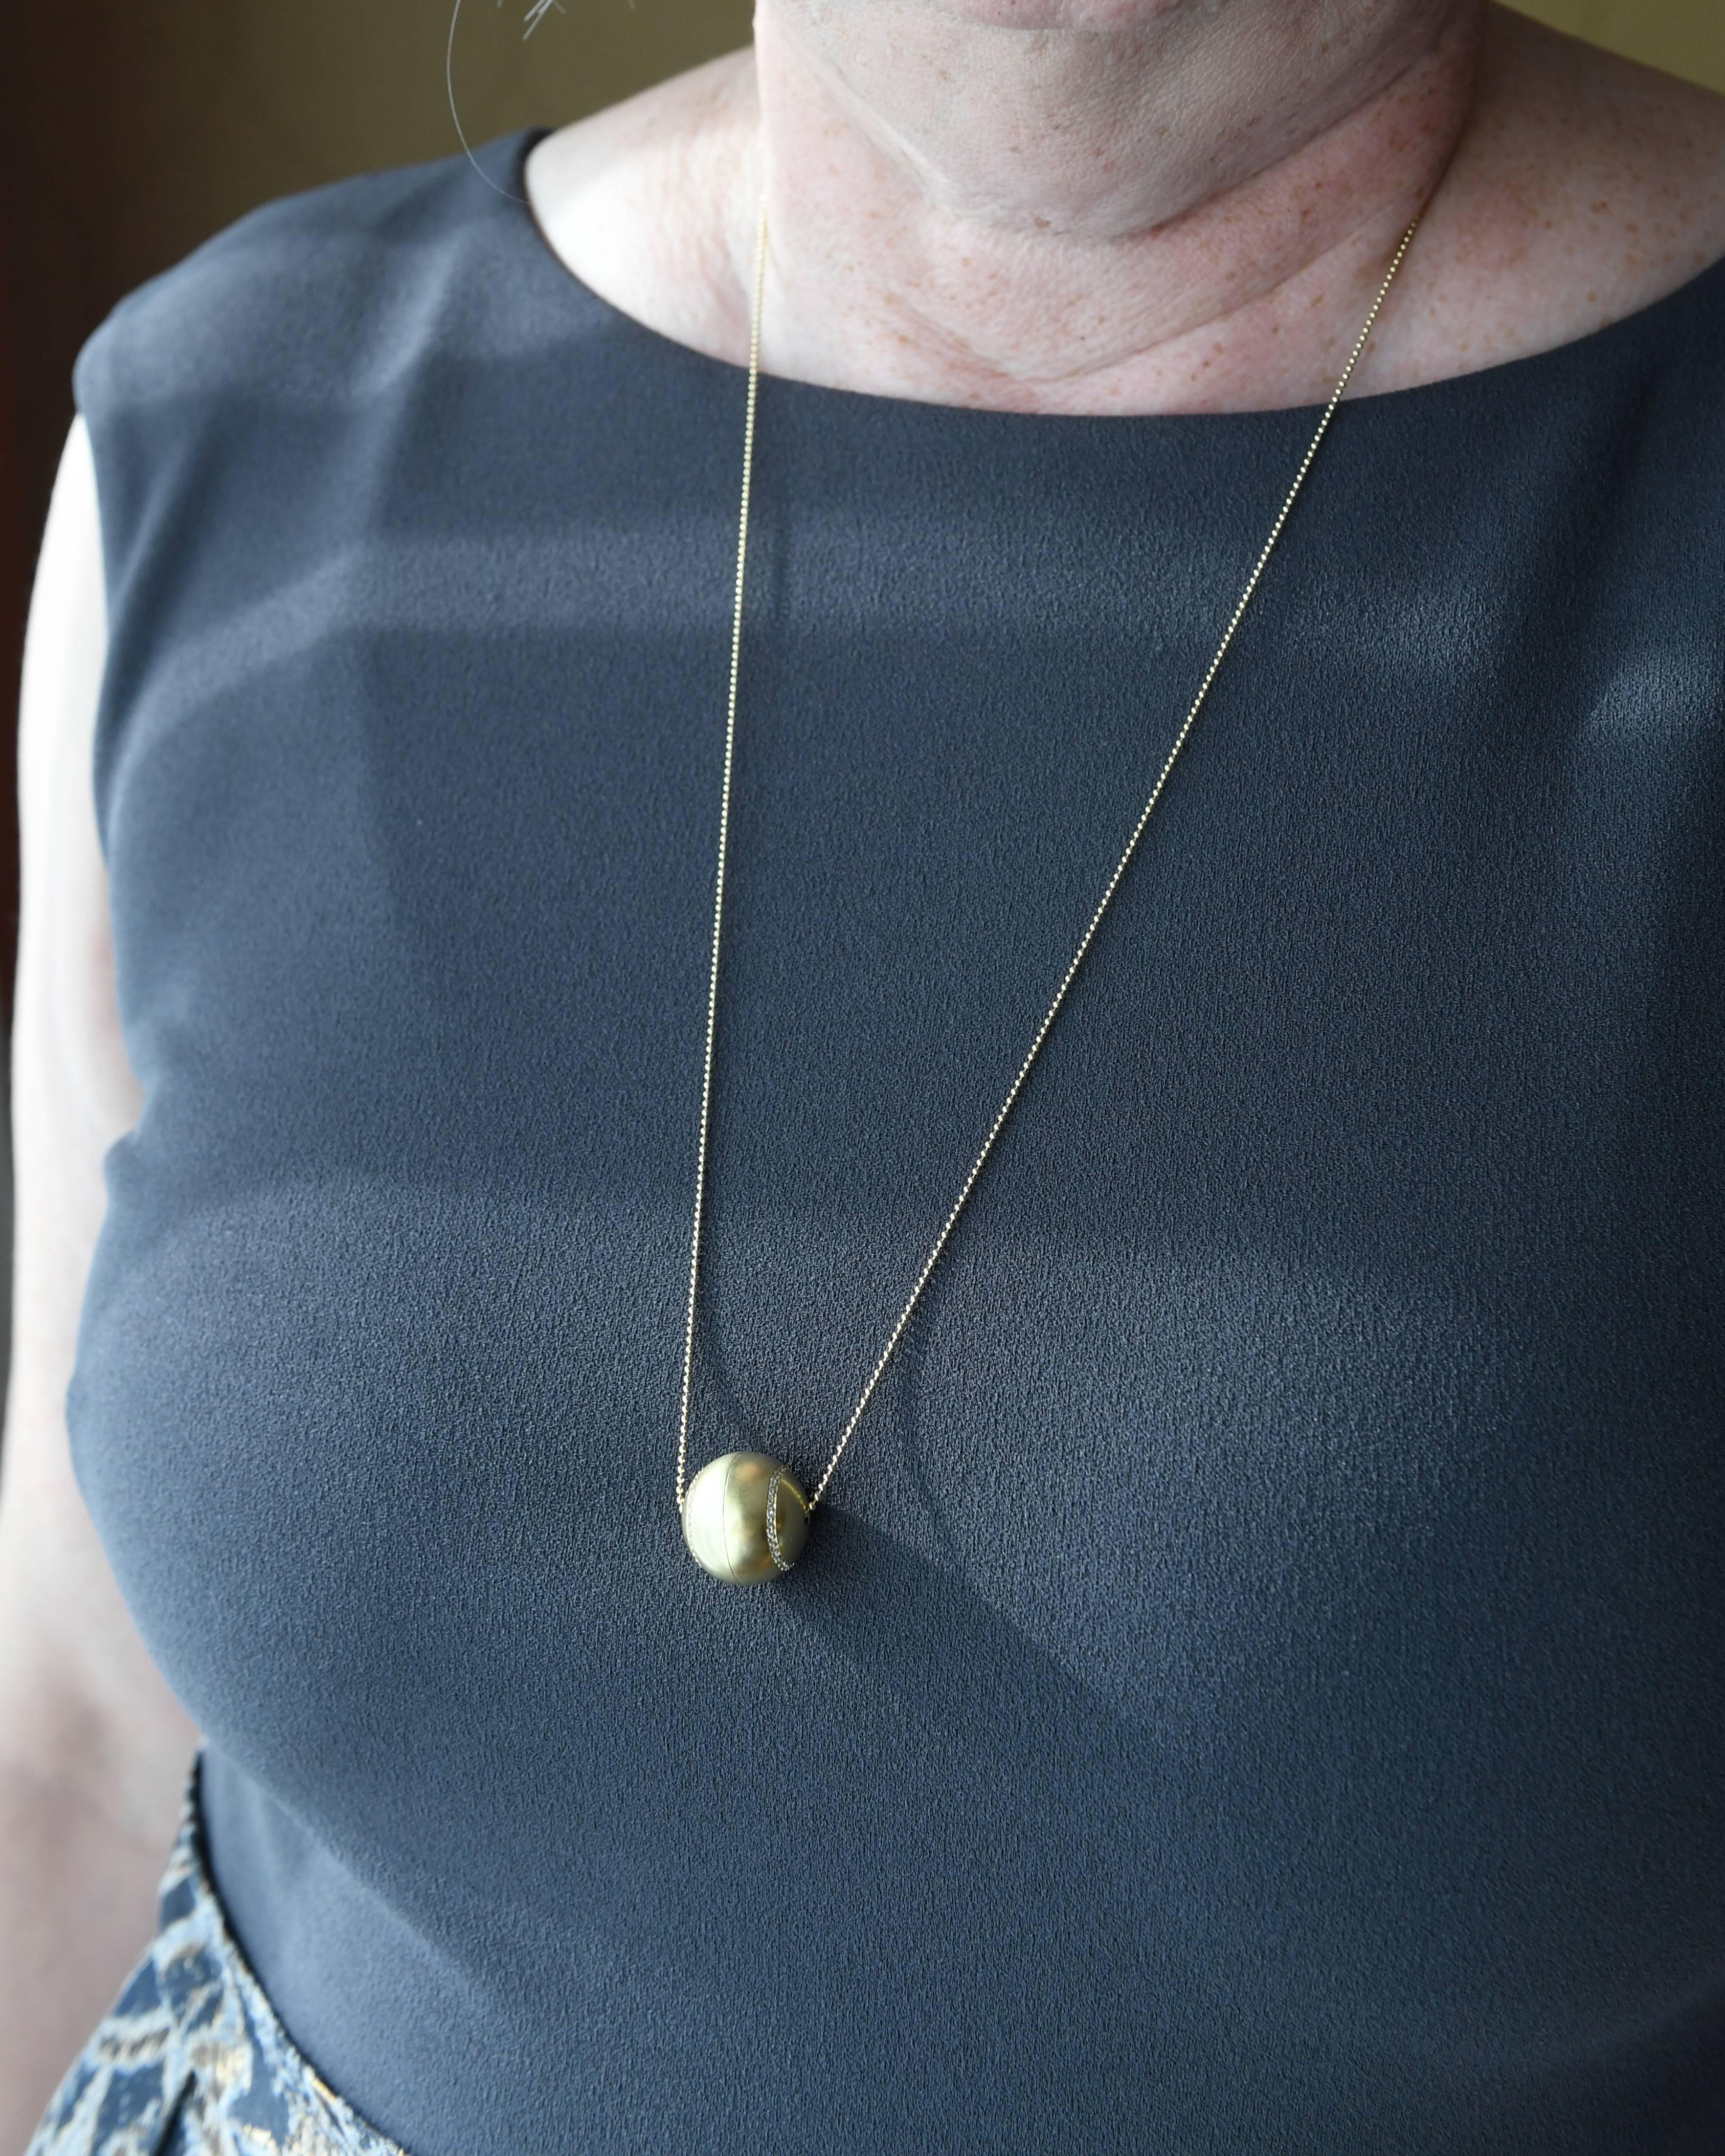 Contemporary Wendy Brandes Mechanical Opening Locket Orb White Diamond and 18K Gold Necklace